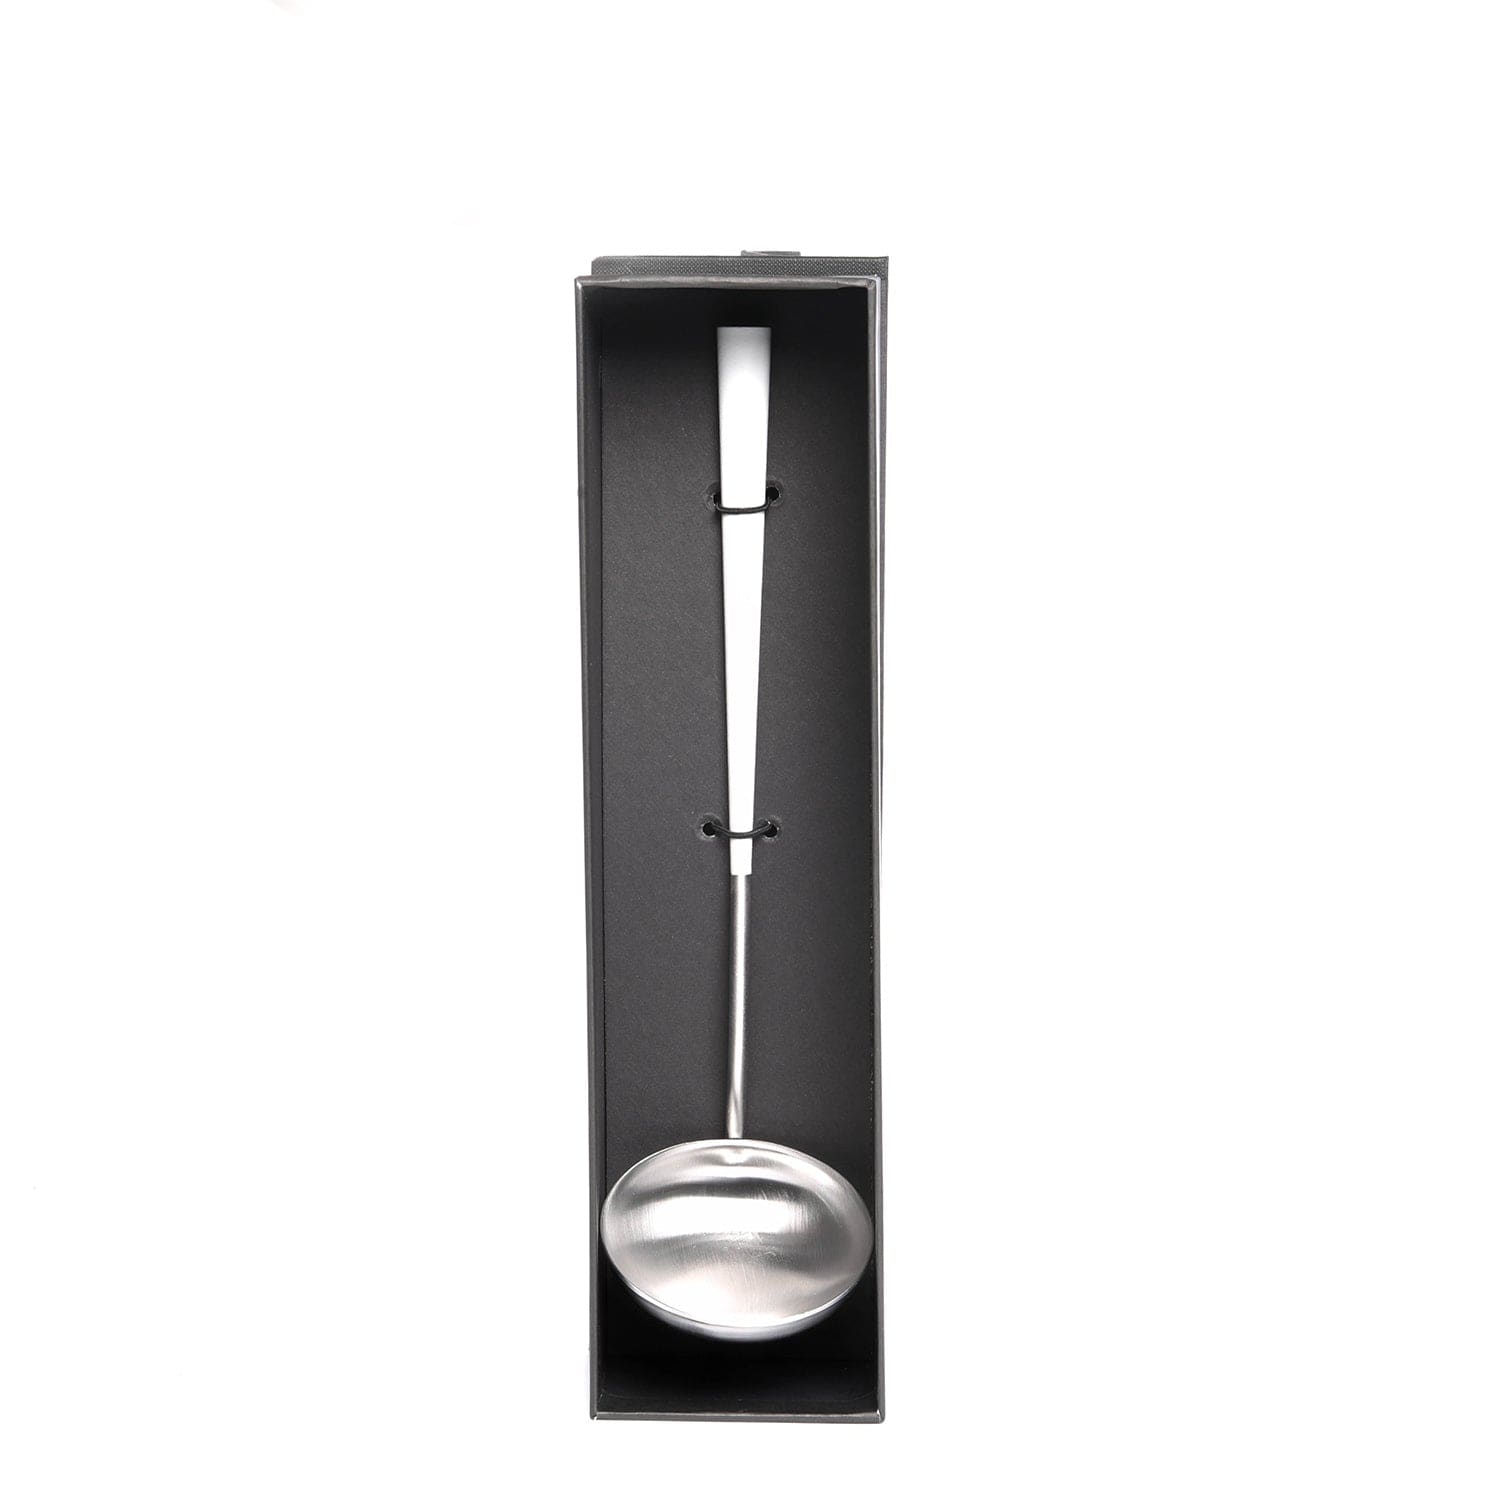 Belo Inox Neo White With Brushed Silver - Soup Ladle - Gift Box